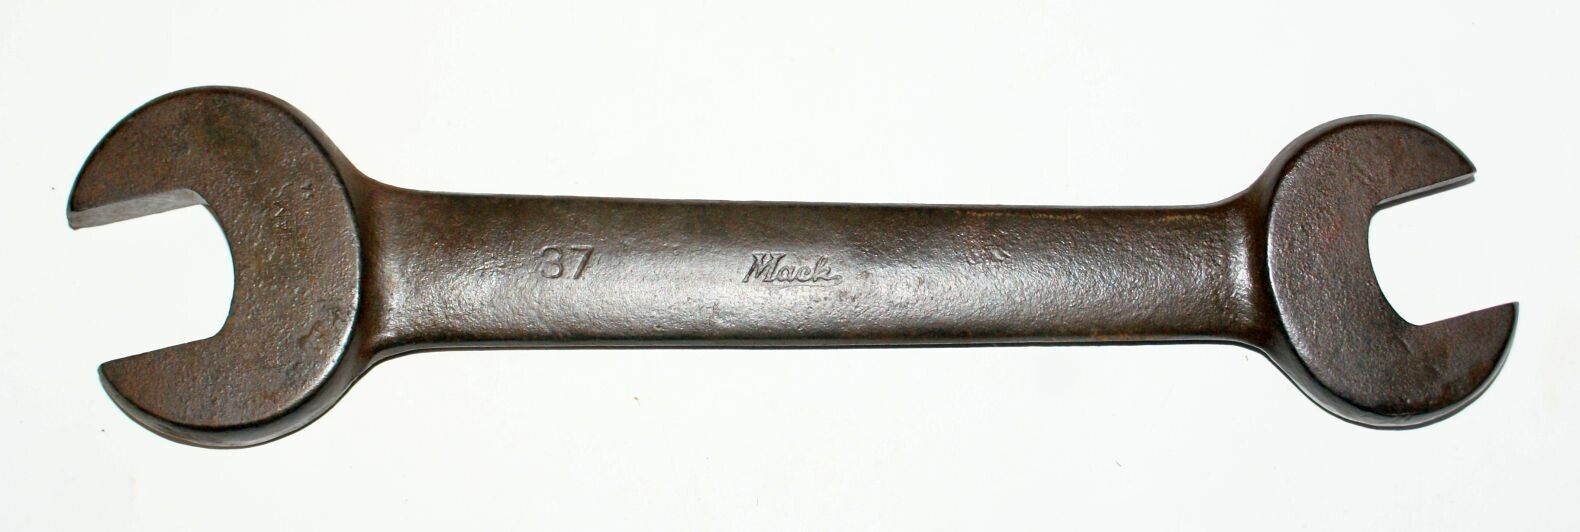 Old Antique Vintage 37 MACK  Wrench Tool Made by Williams 1 1/4